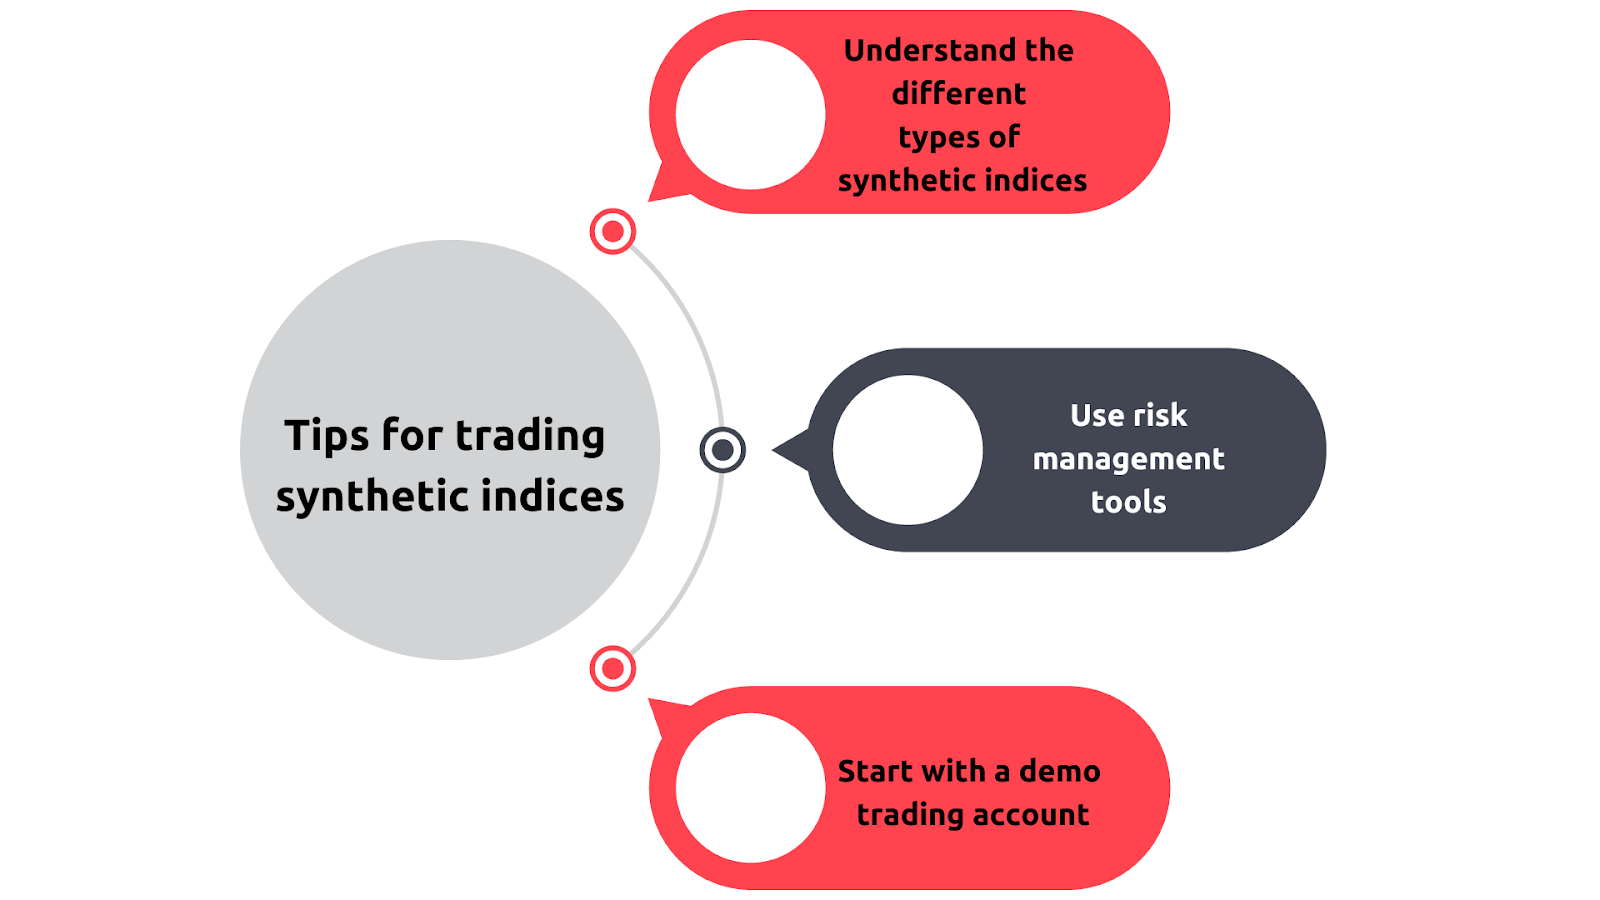 Tips for trading synthetic indices infographic